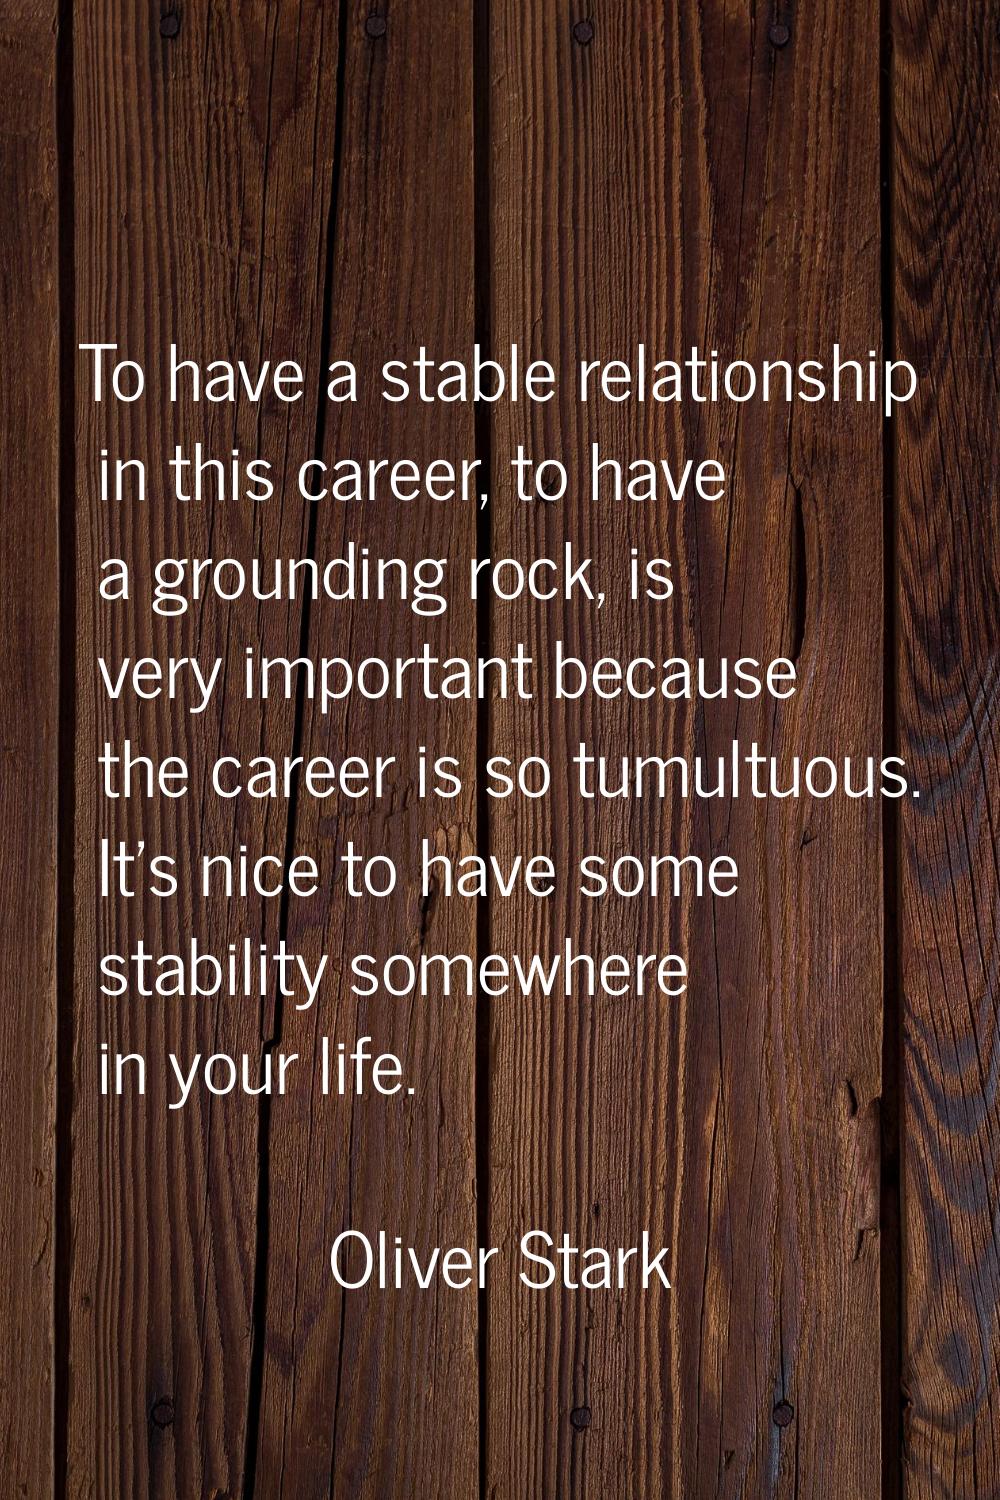 To have a stable relationship in this career, to have a grounding rock, is very important because t